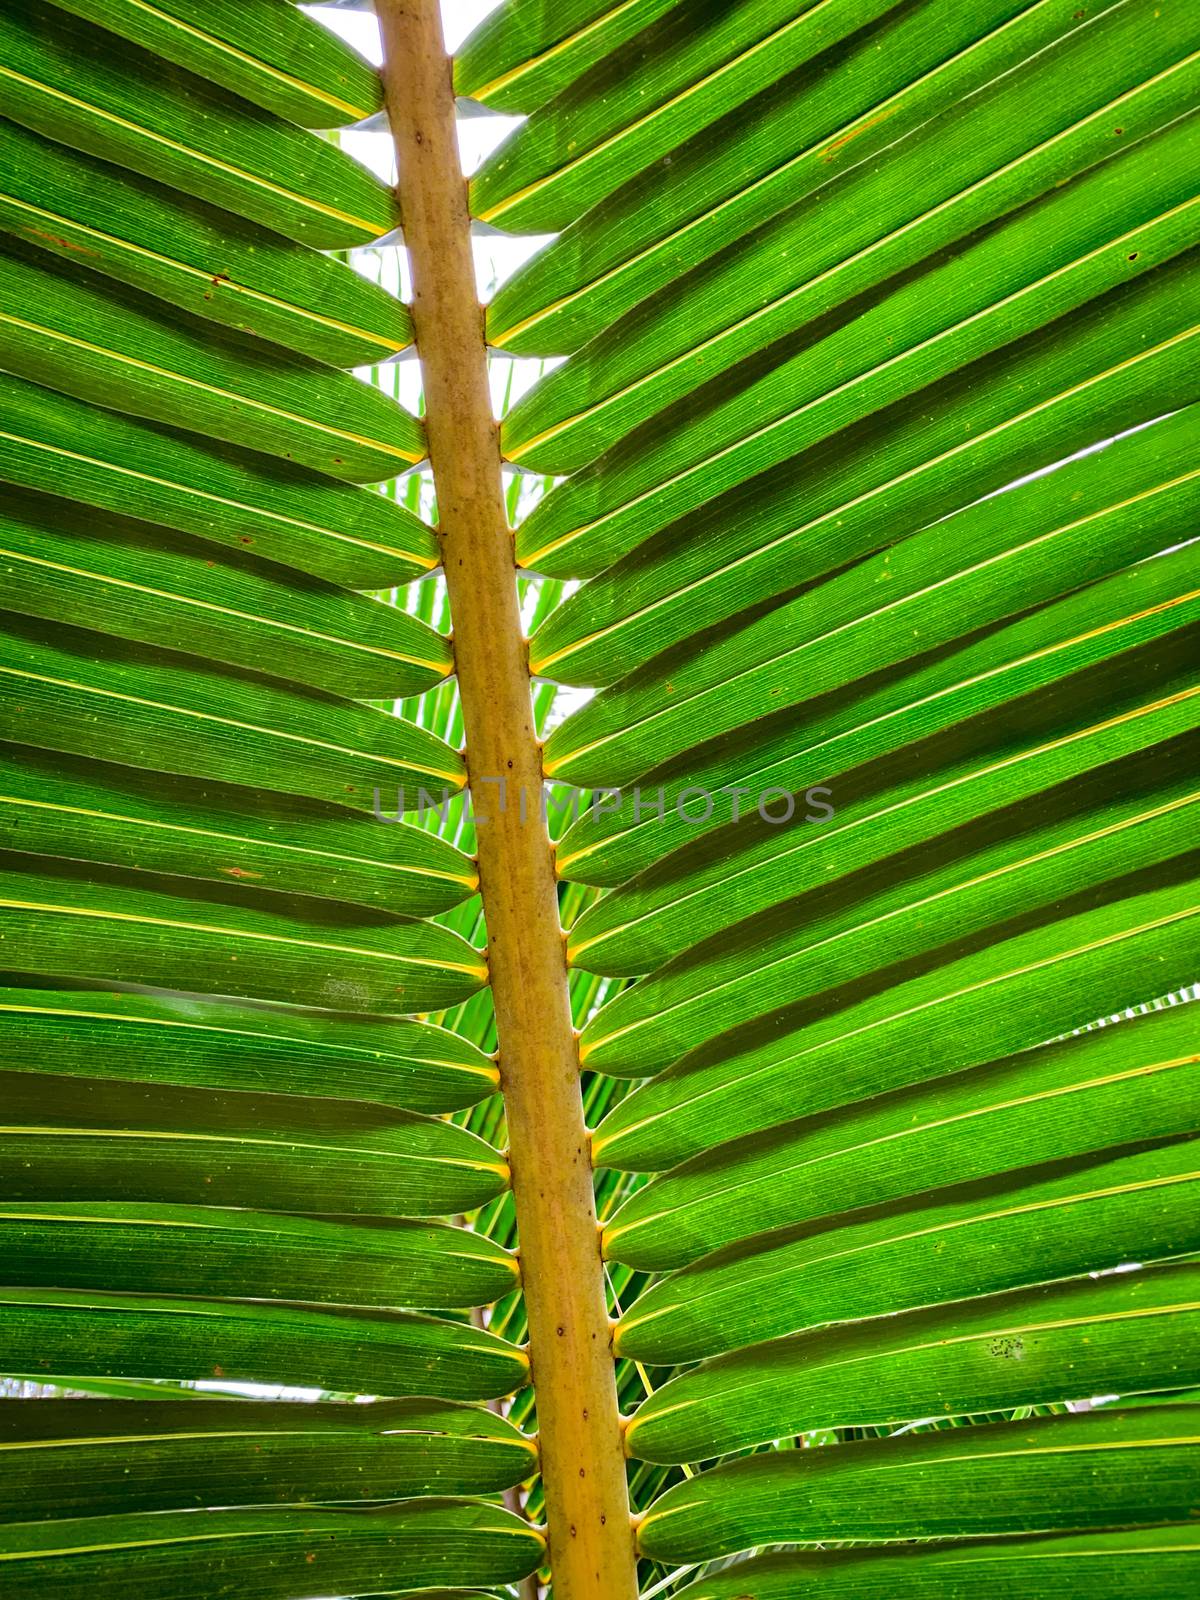 Under coconut leaves and stalk at tropical beach. Closeup palm t by Fahroni